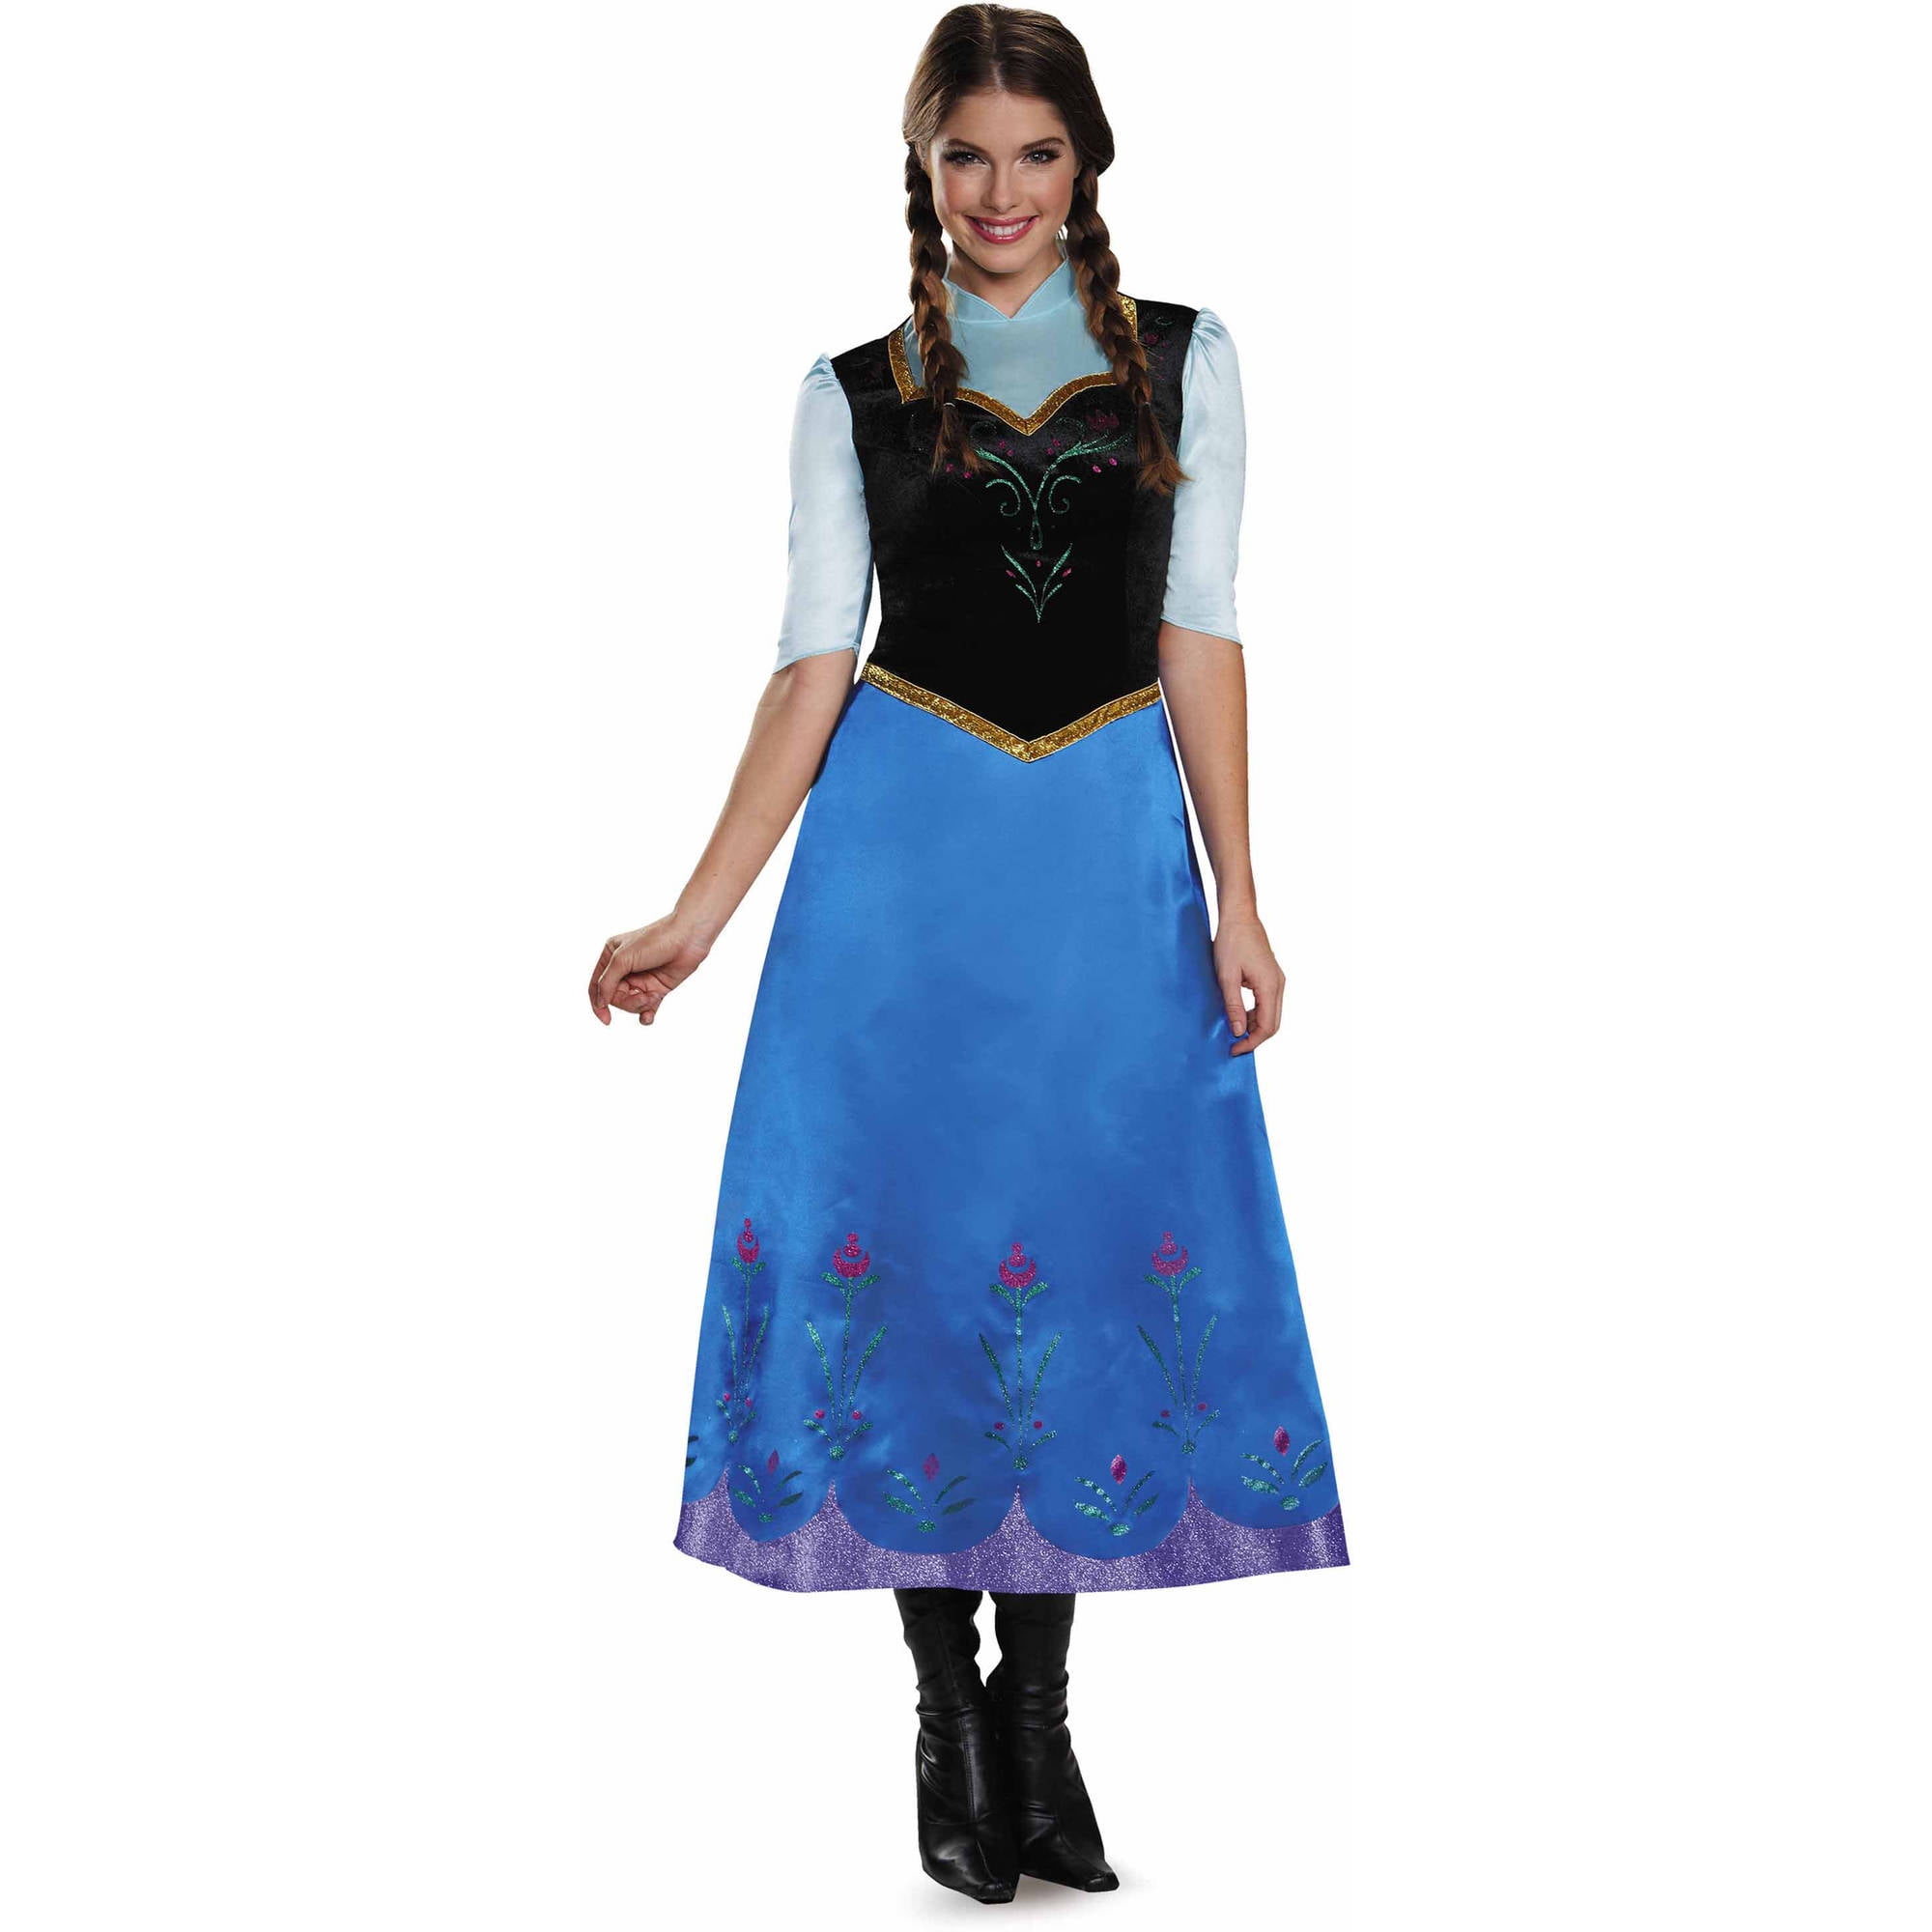 anna dress for adults